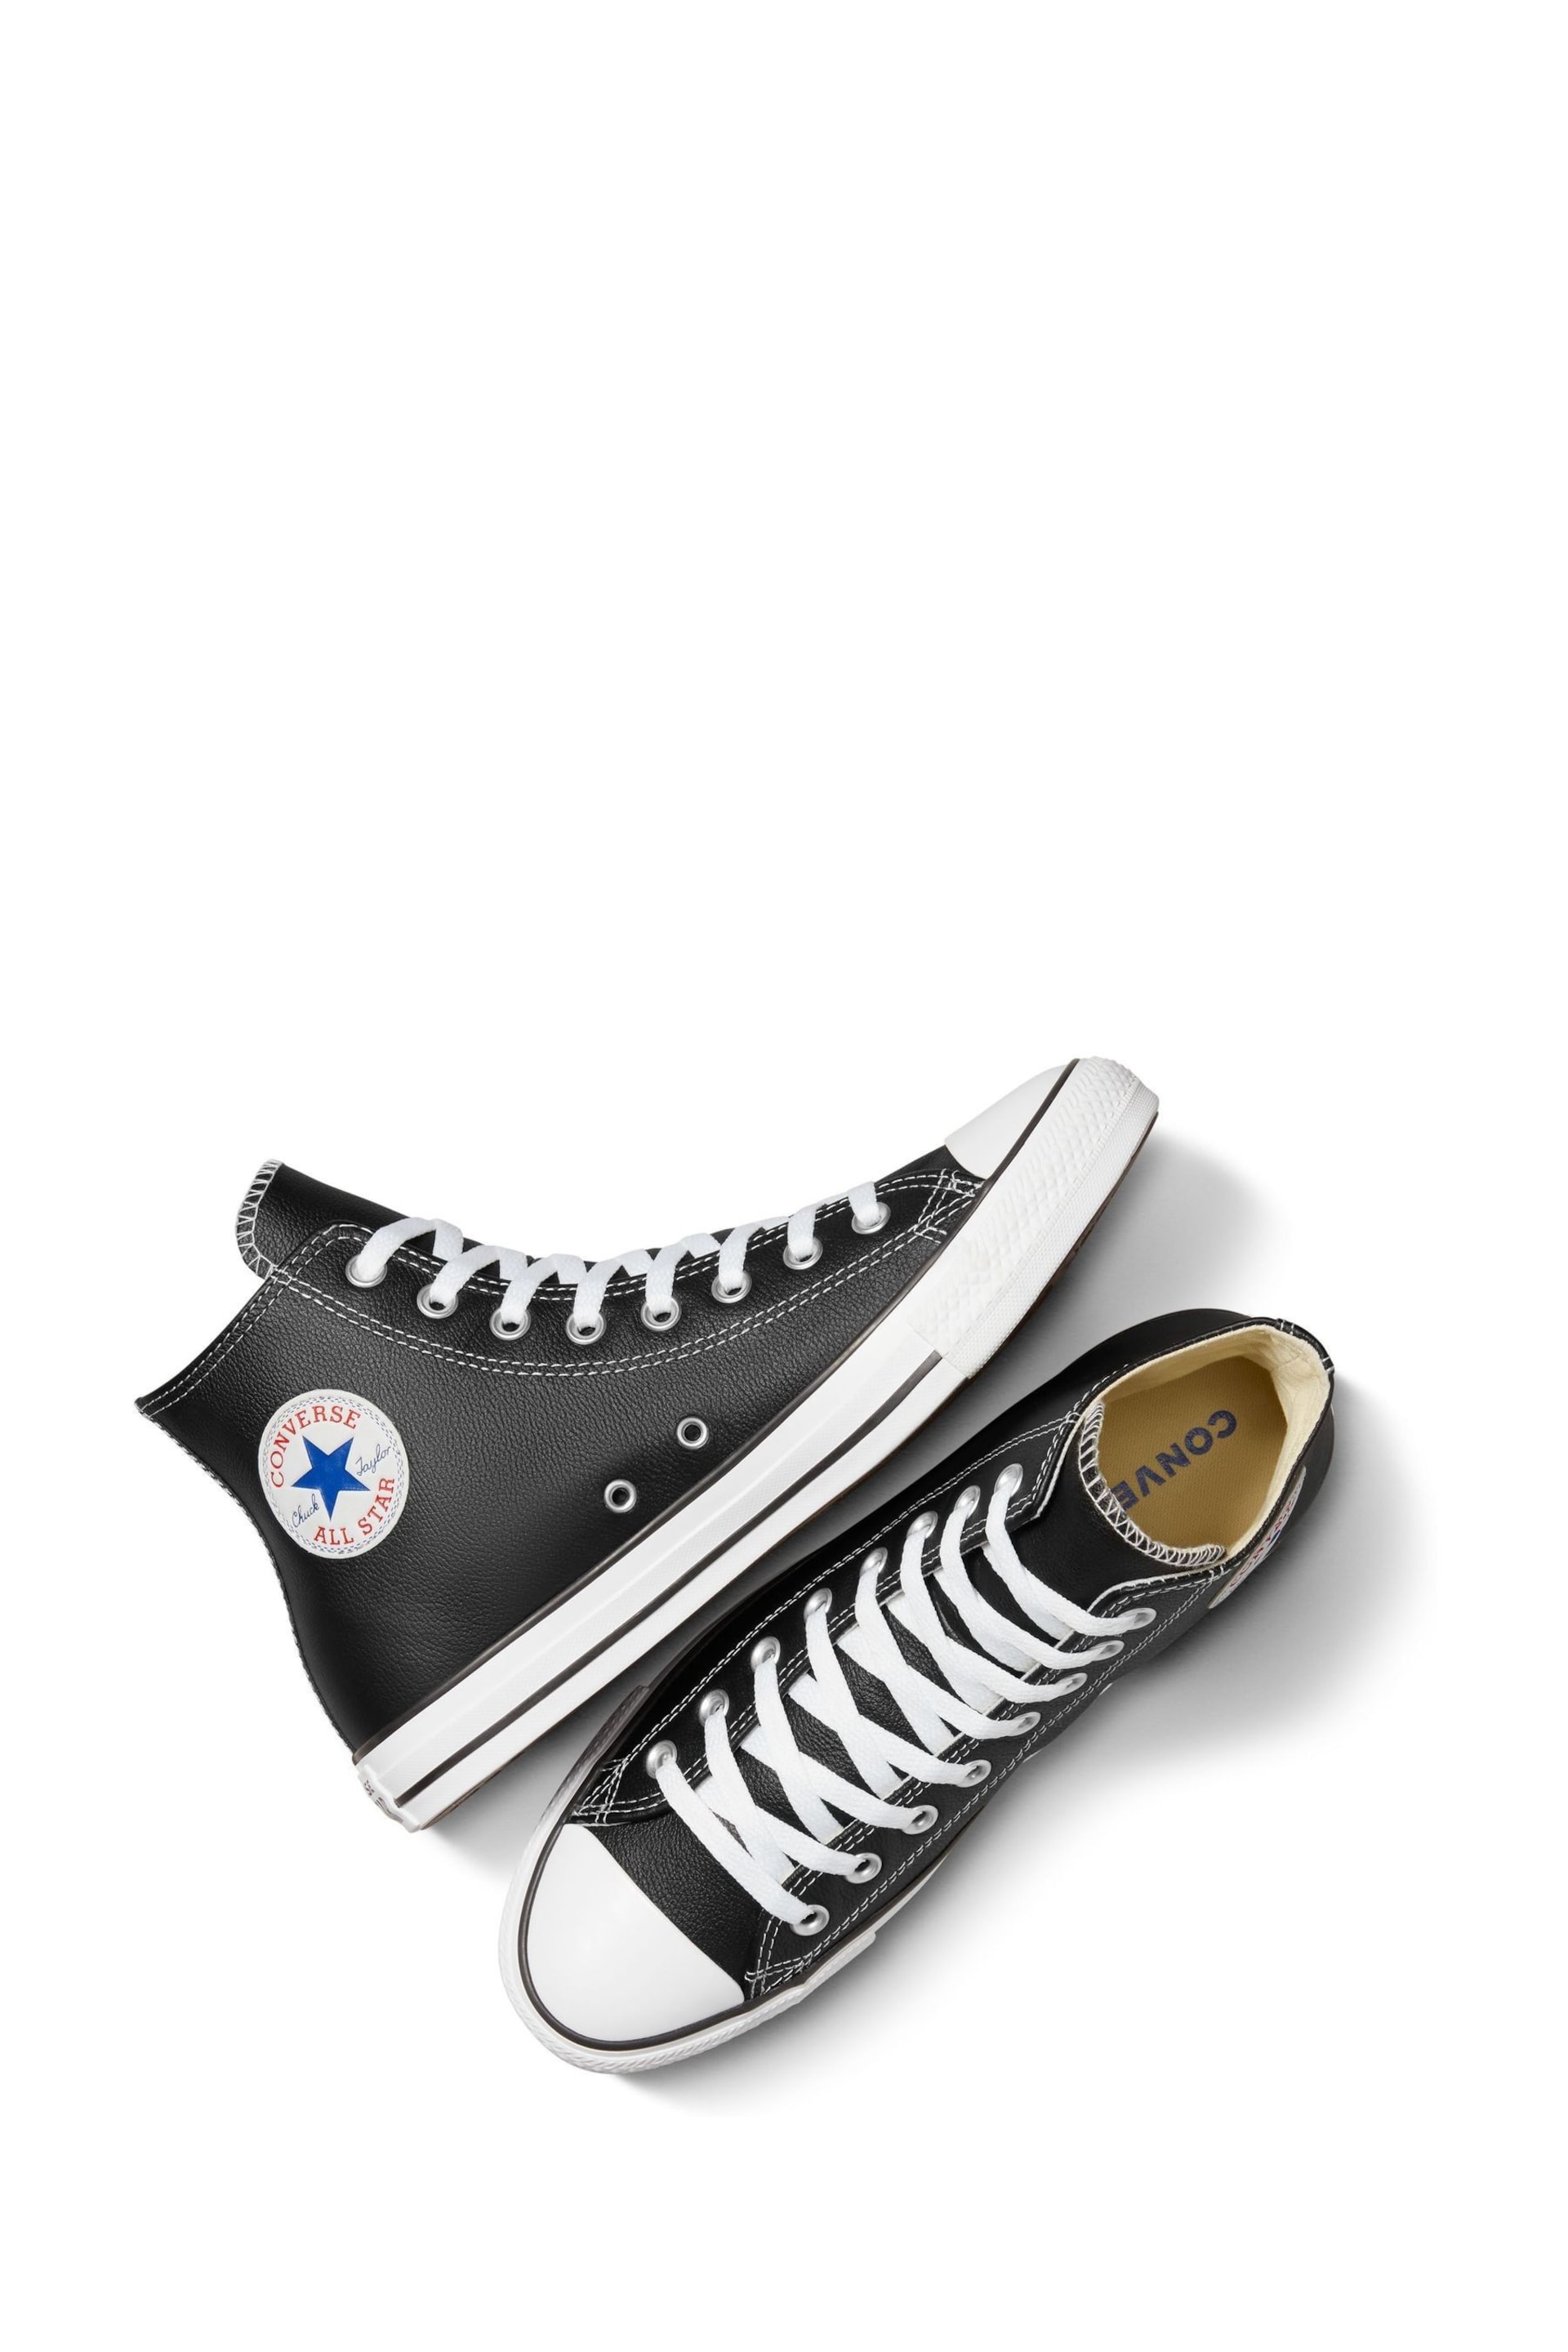 Converse Black Leather Chuck Taylor All Star High Top Trainers - Image 10 of 11